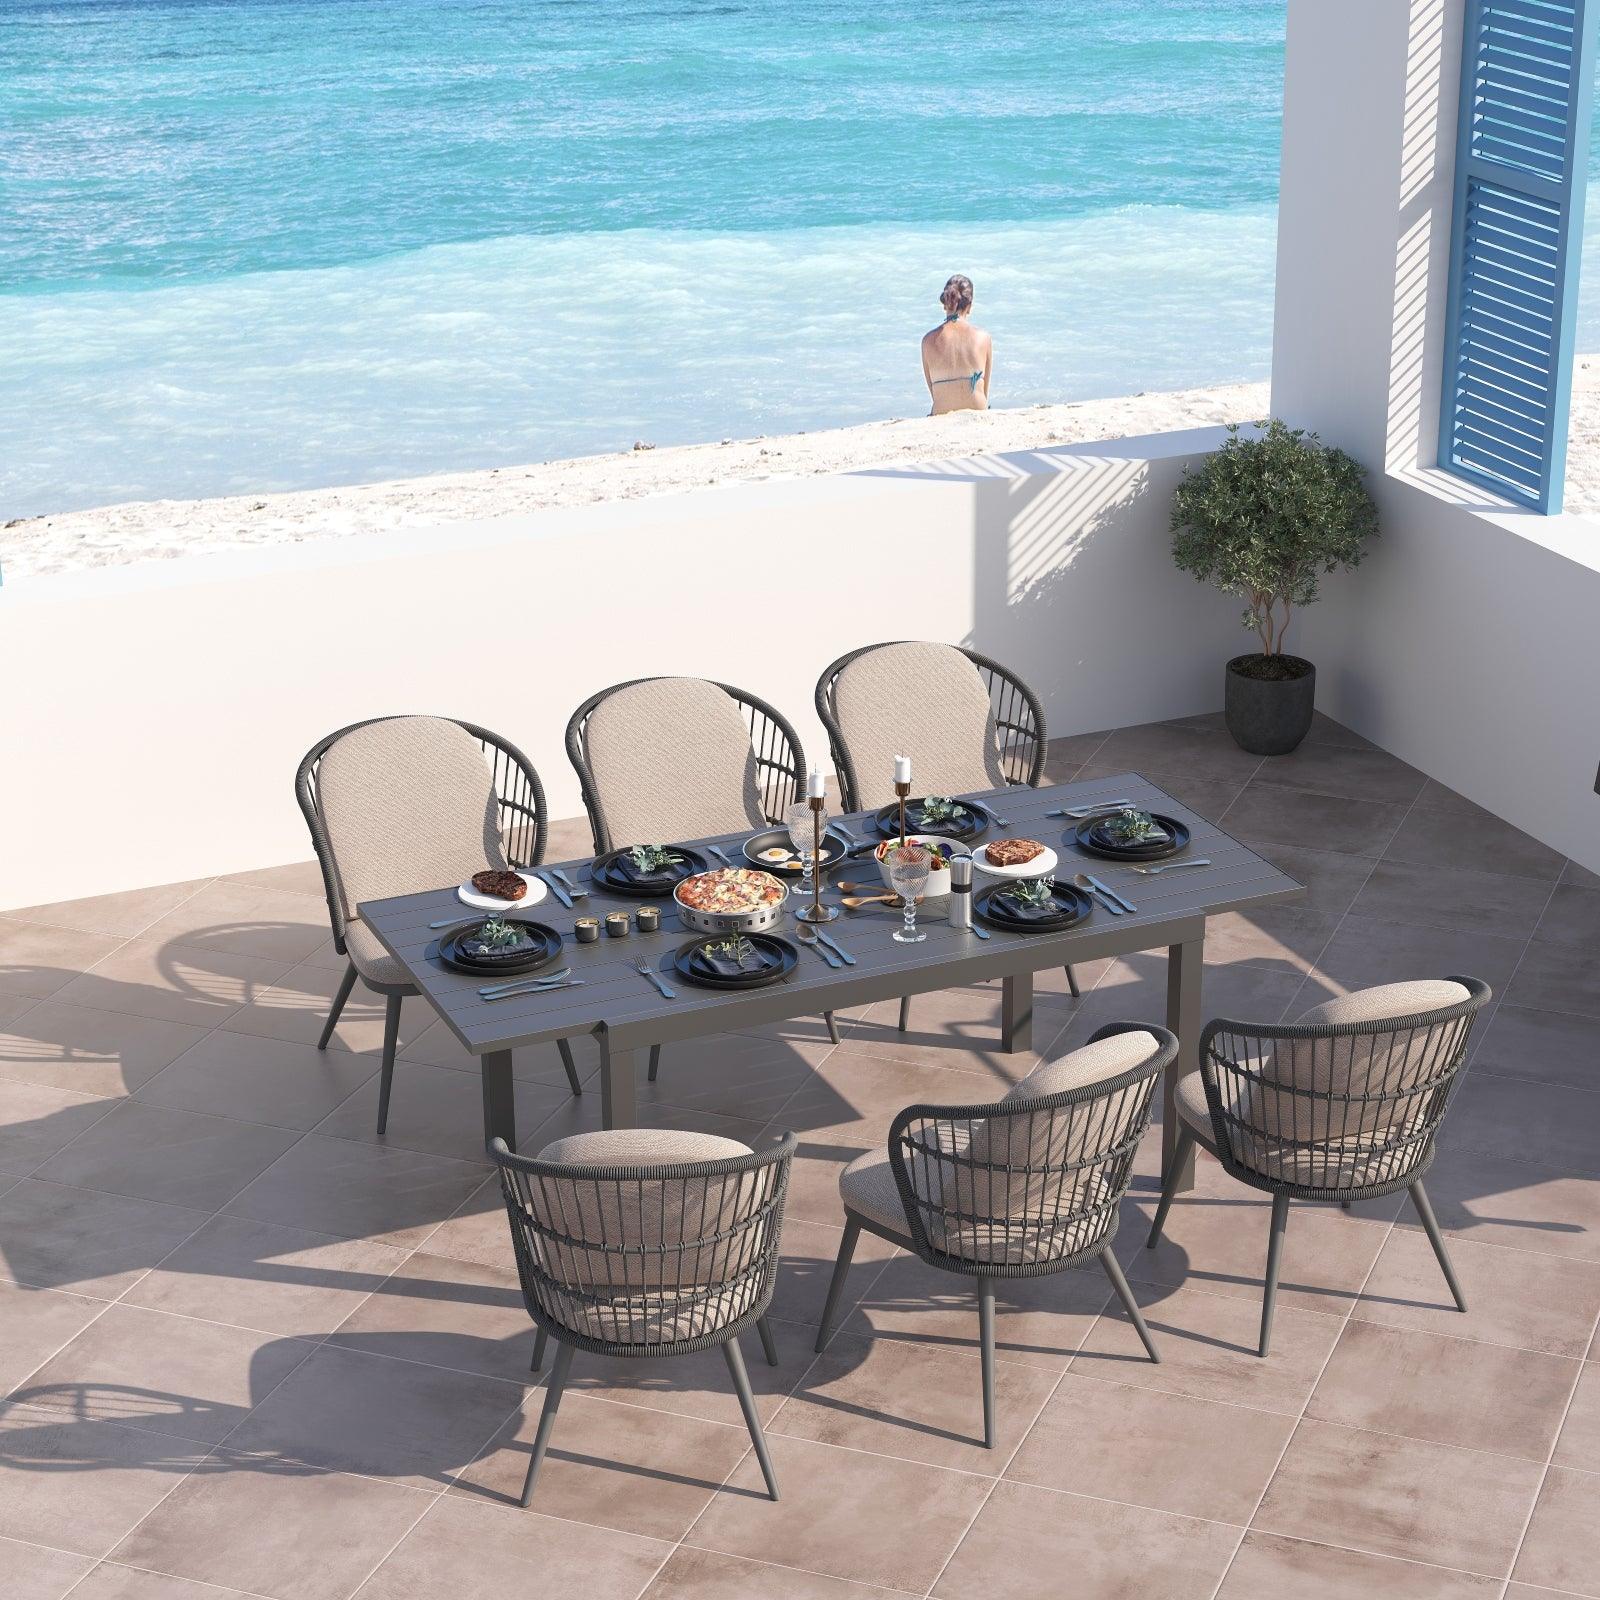 Comino Grey Rope Outdoor Dining Chairs with Aluminum Frame, Set of 2/4